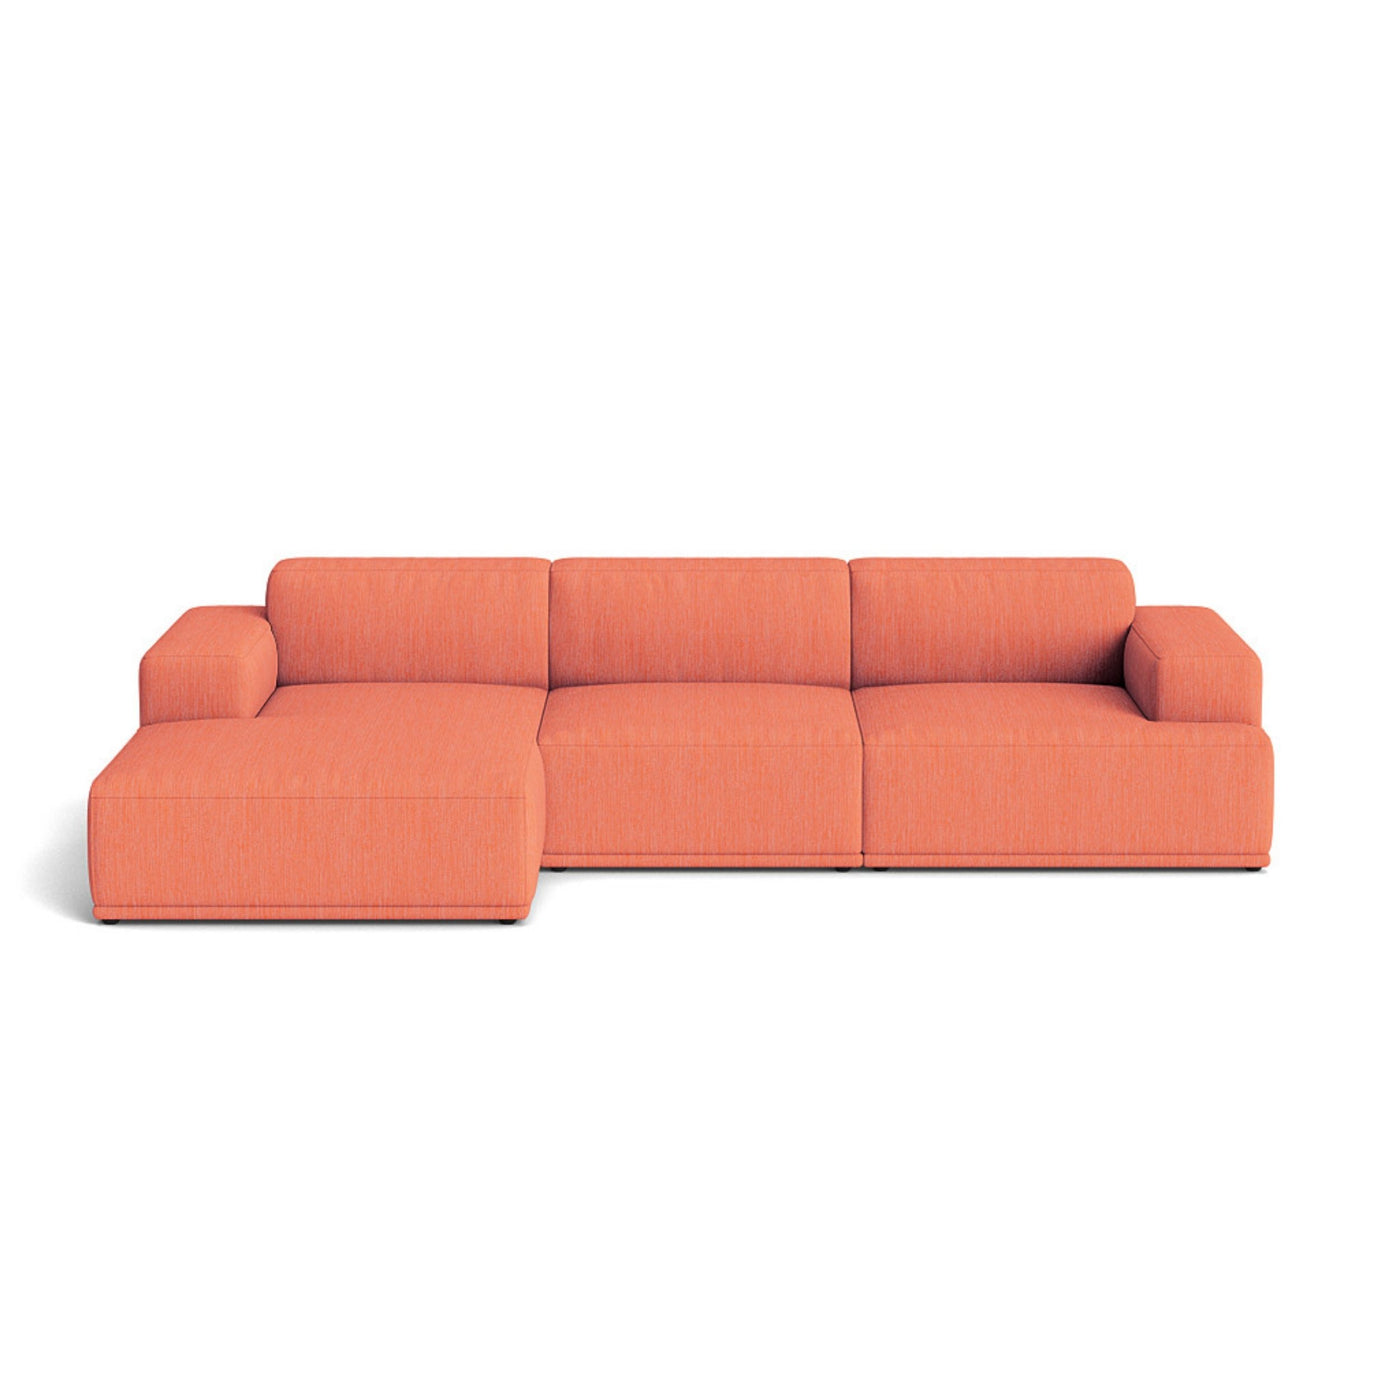 Muuto Connect Soft Modular 3 Seater Sofa, configuration 3. Made-to-order from someday designs. #colour_balder-542